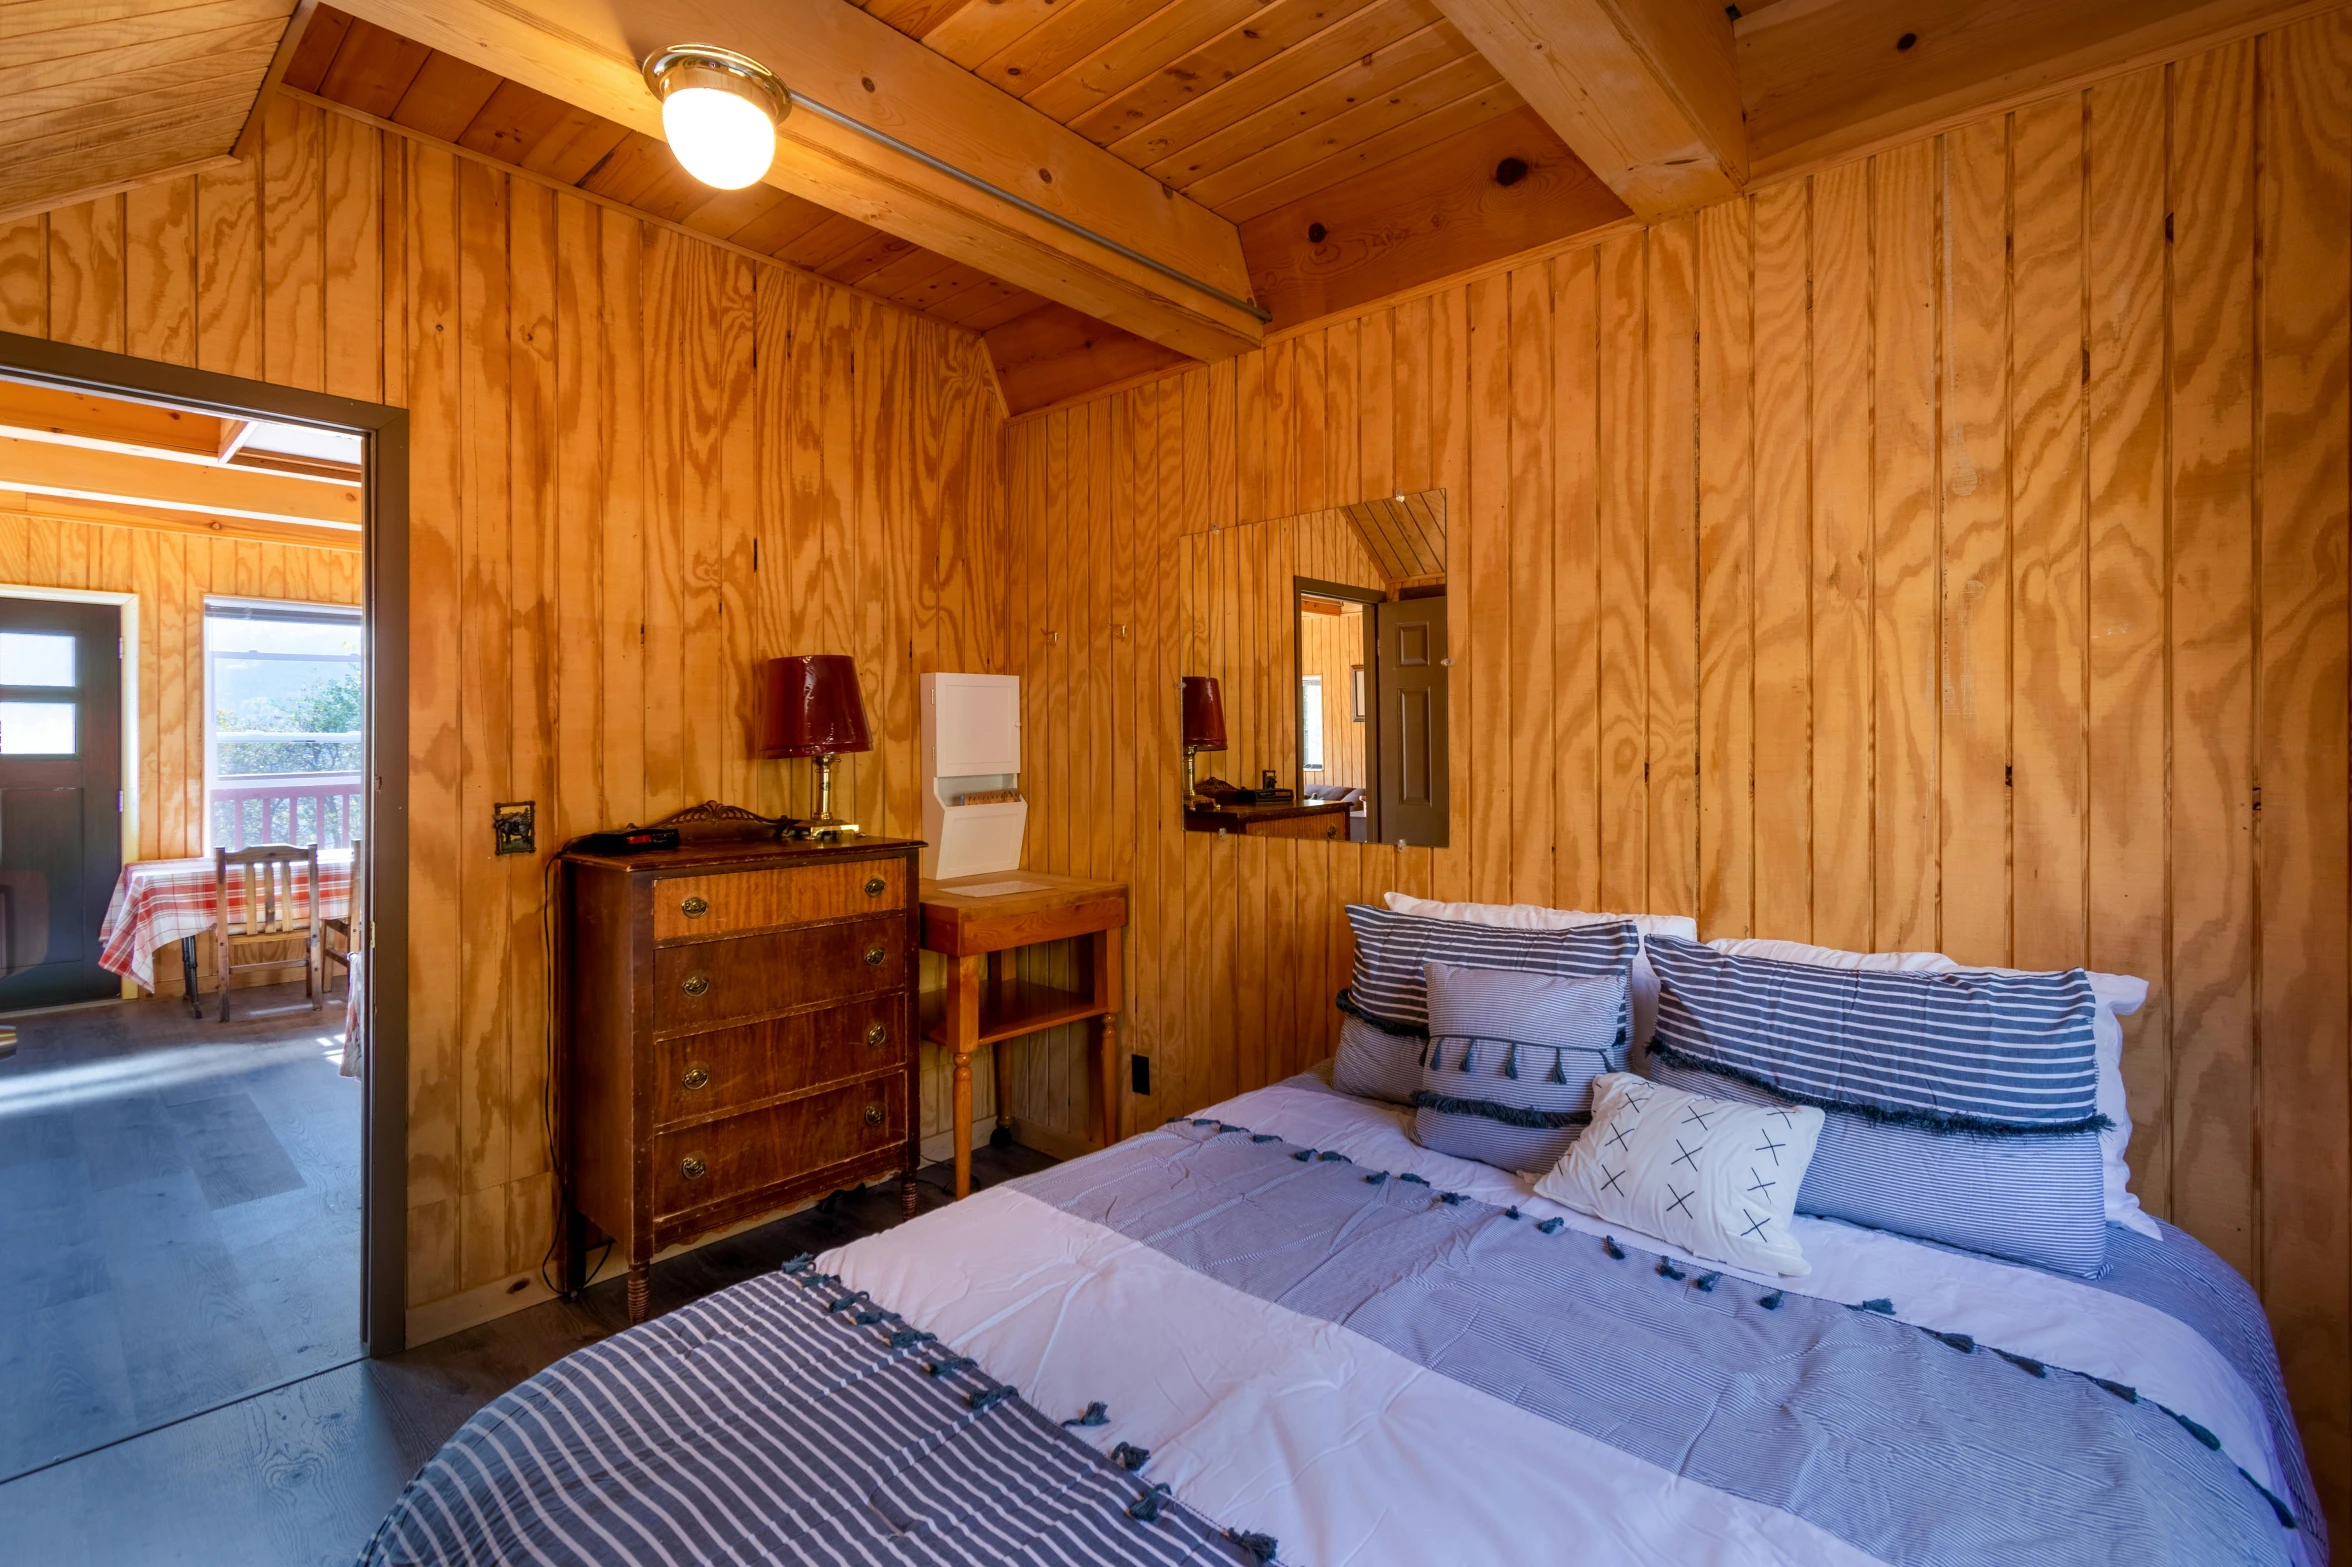 this is an image of a wooden cabin bedroom